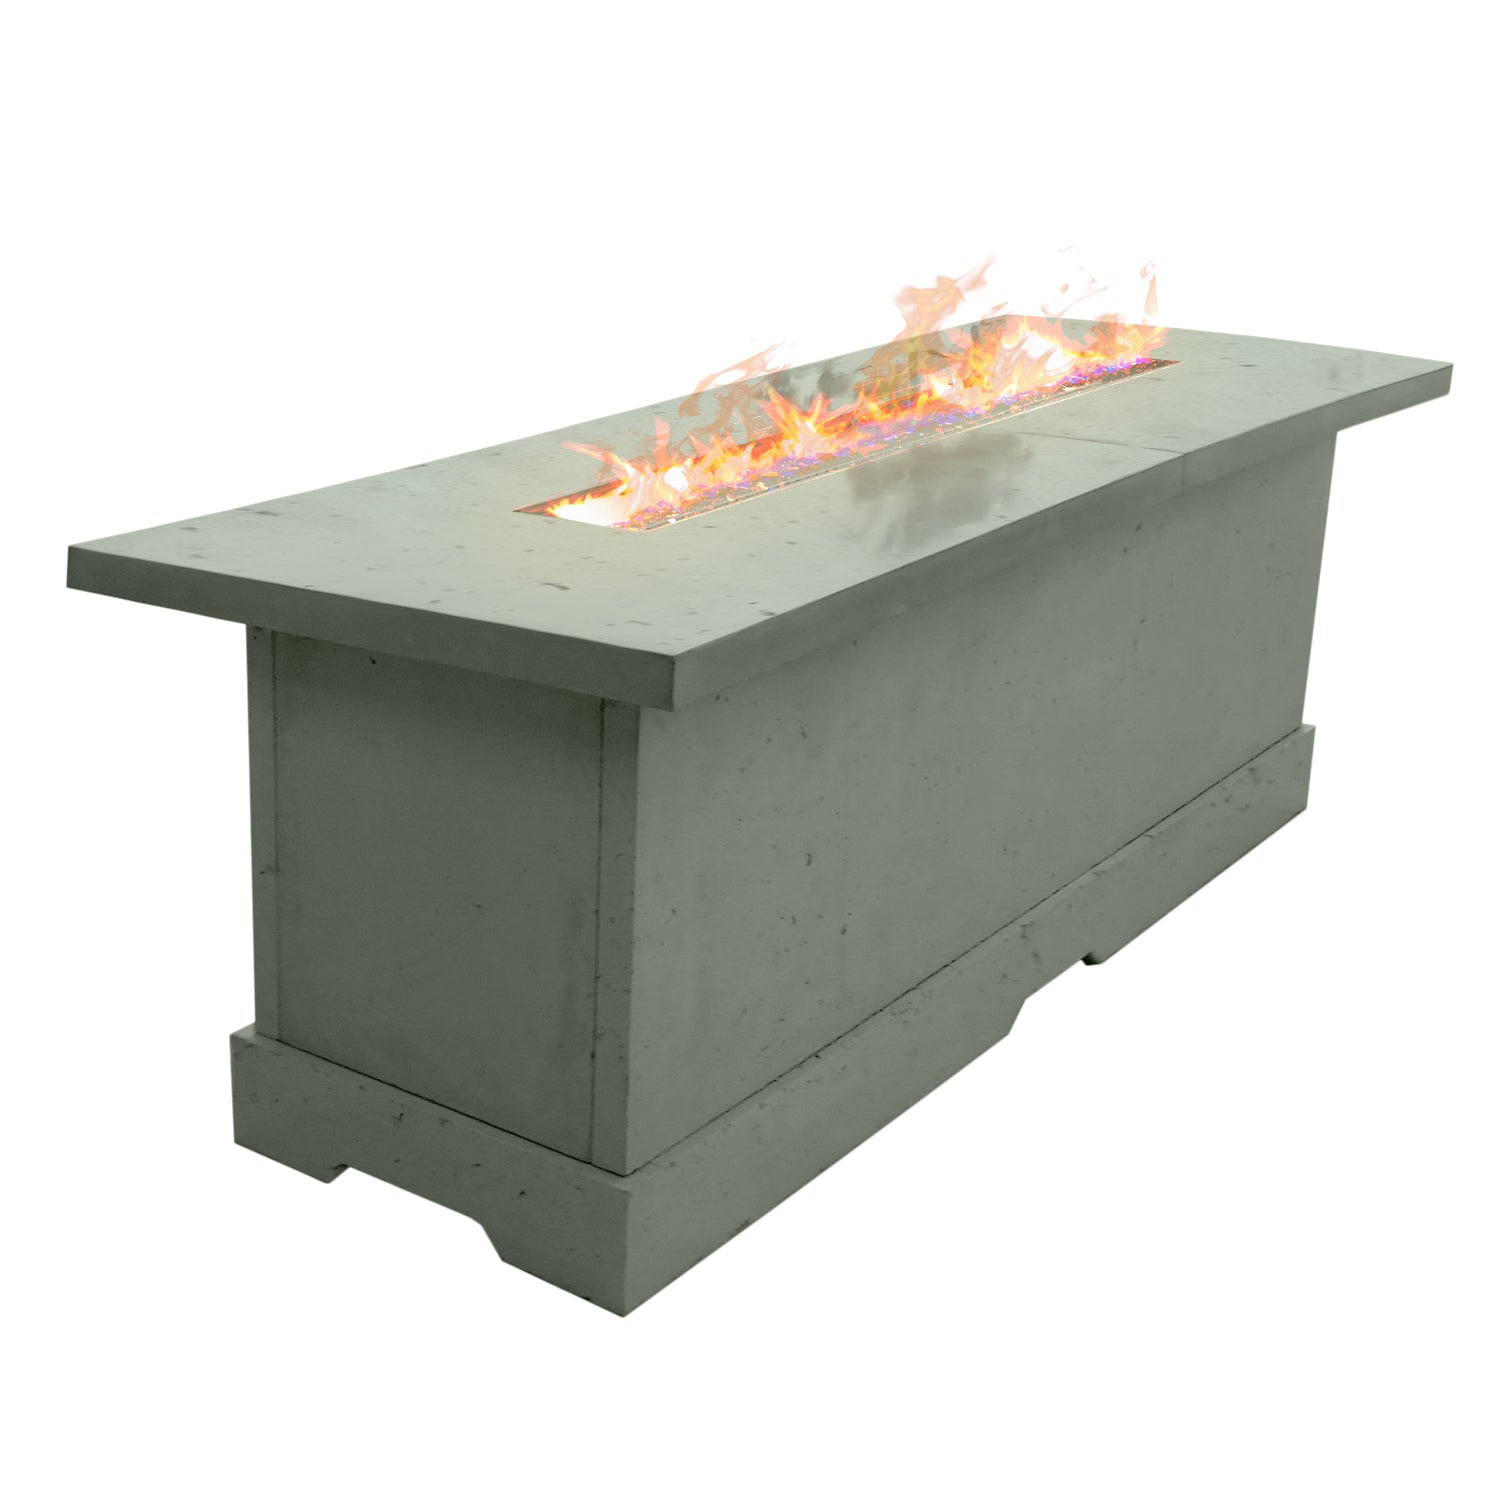 HearthCo Aleutian Islands Counter Height Fire Pit Table - Outdoor Entertaining - Kozy Korner Fire Pits